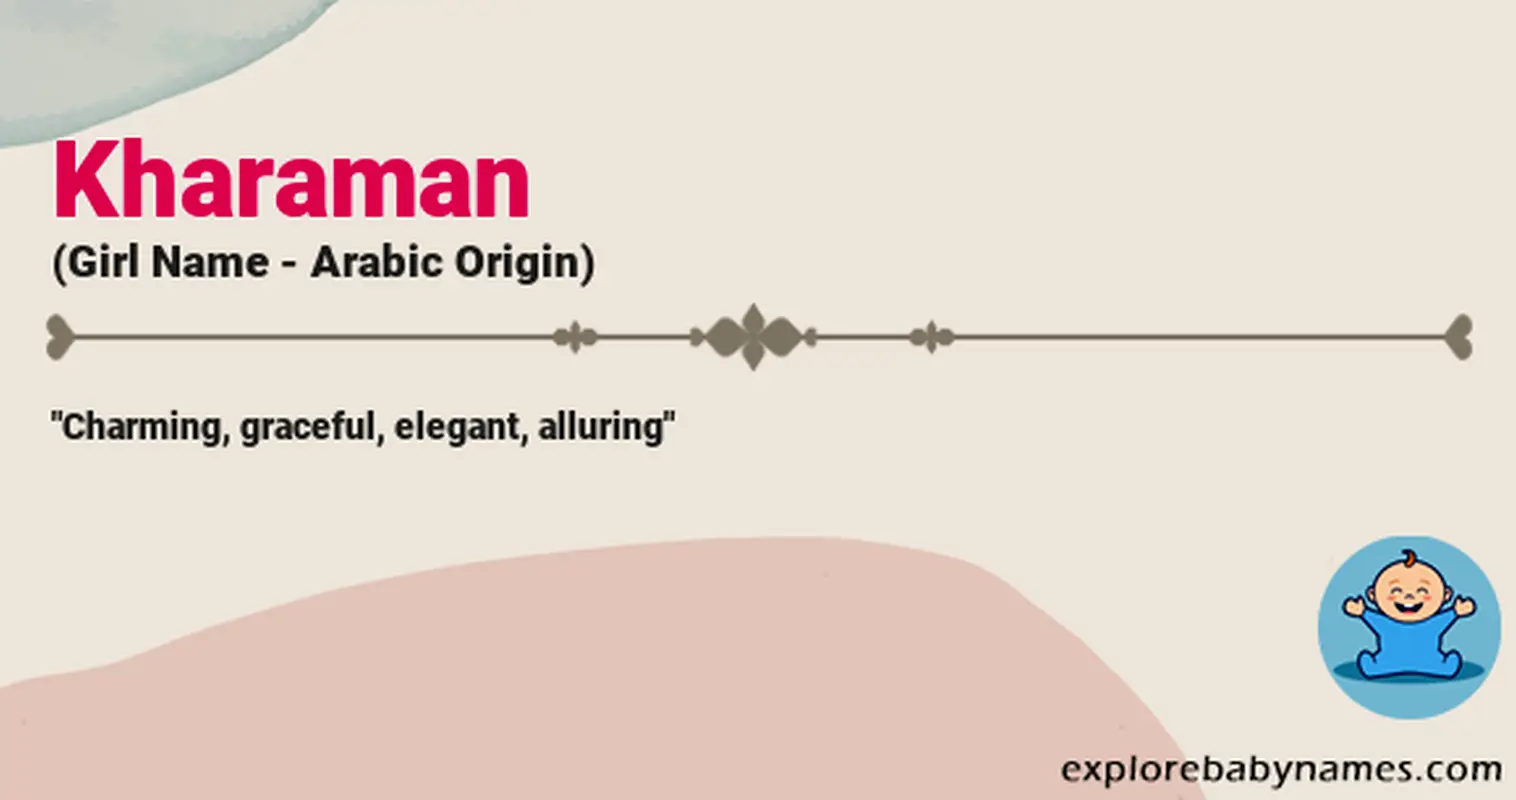 Meaning of Kharaman